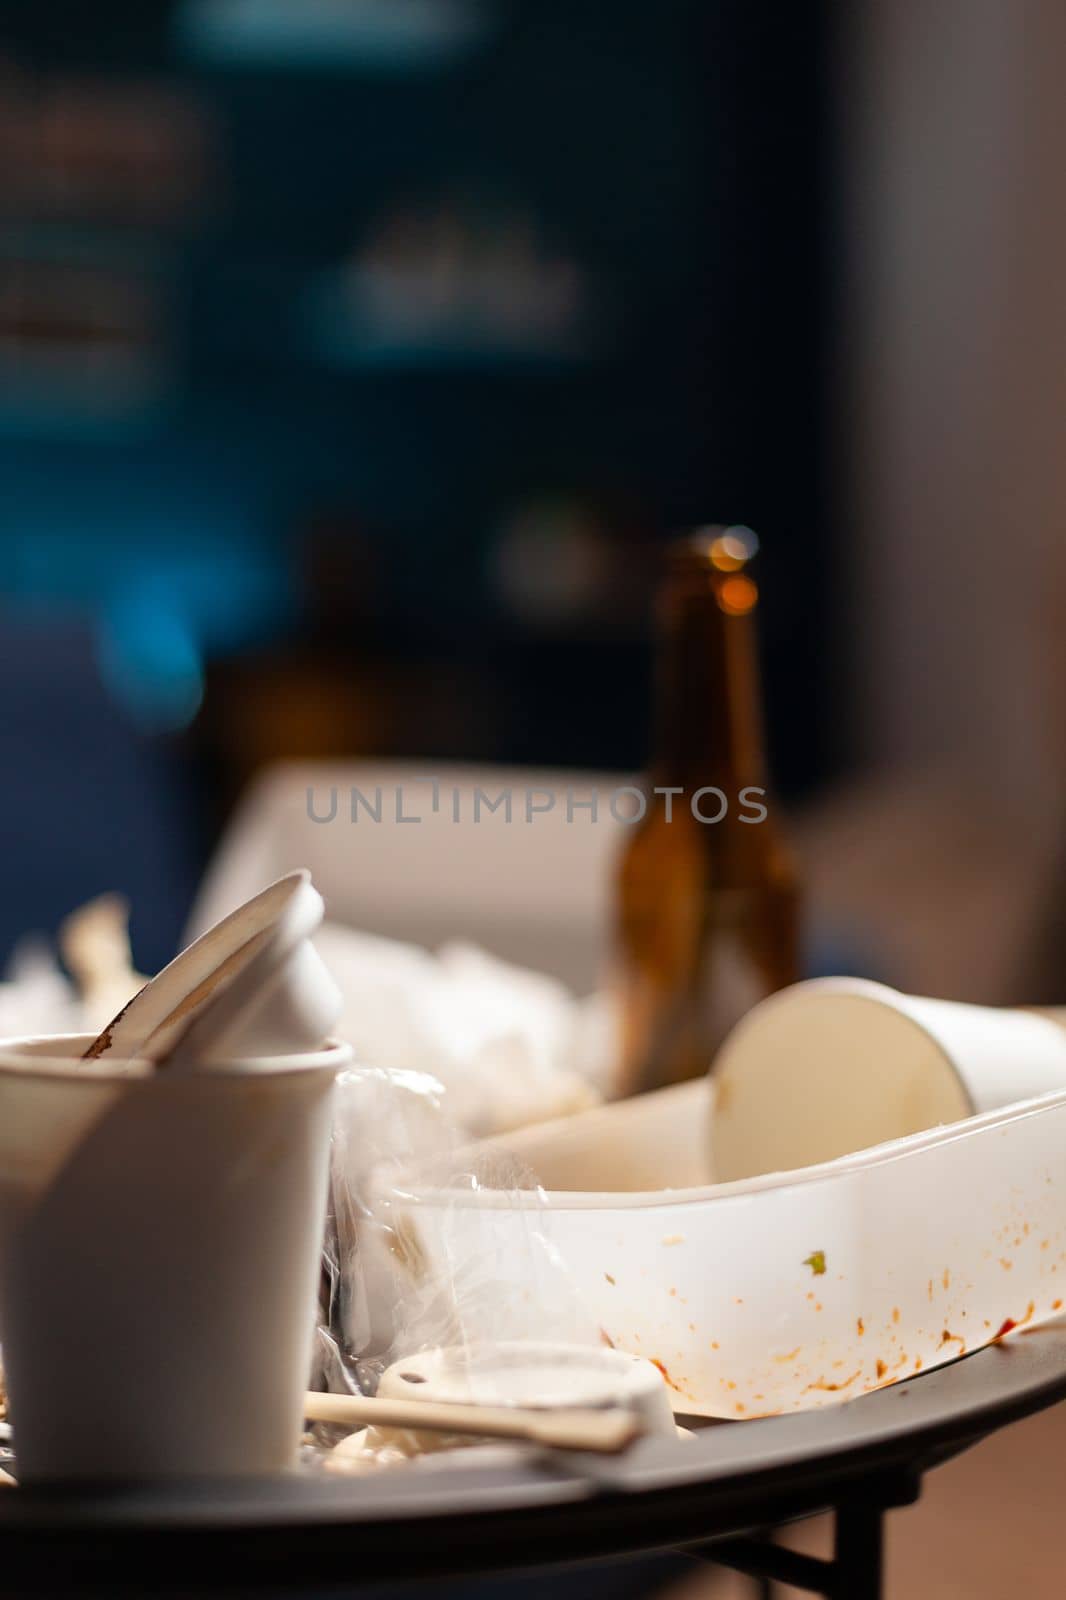 Empty dirty food cans and beer bottles left on unorganized table by DCStudio